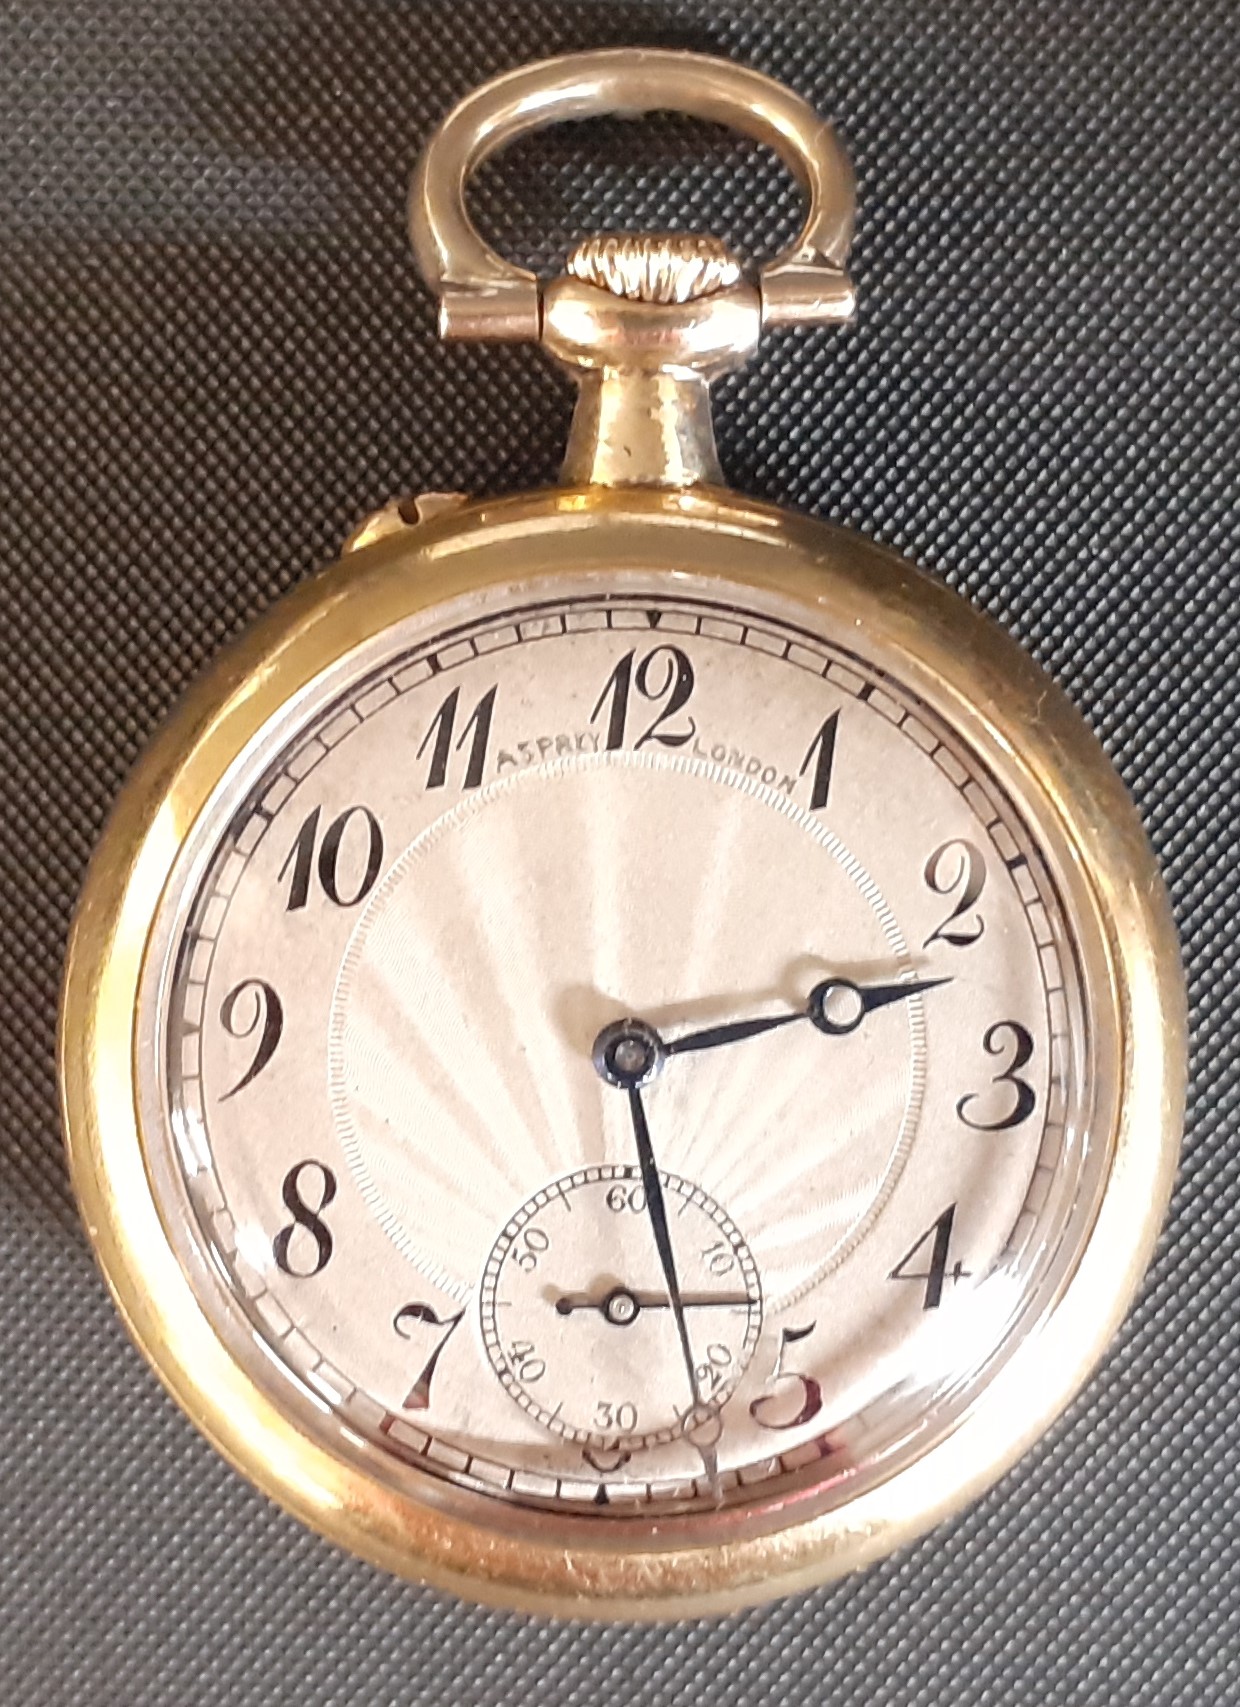 18k gold fob watch with subsidiary seconds dial, engine turned face, with believed to be later - Image 2 of 6